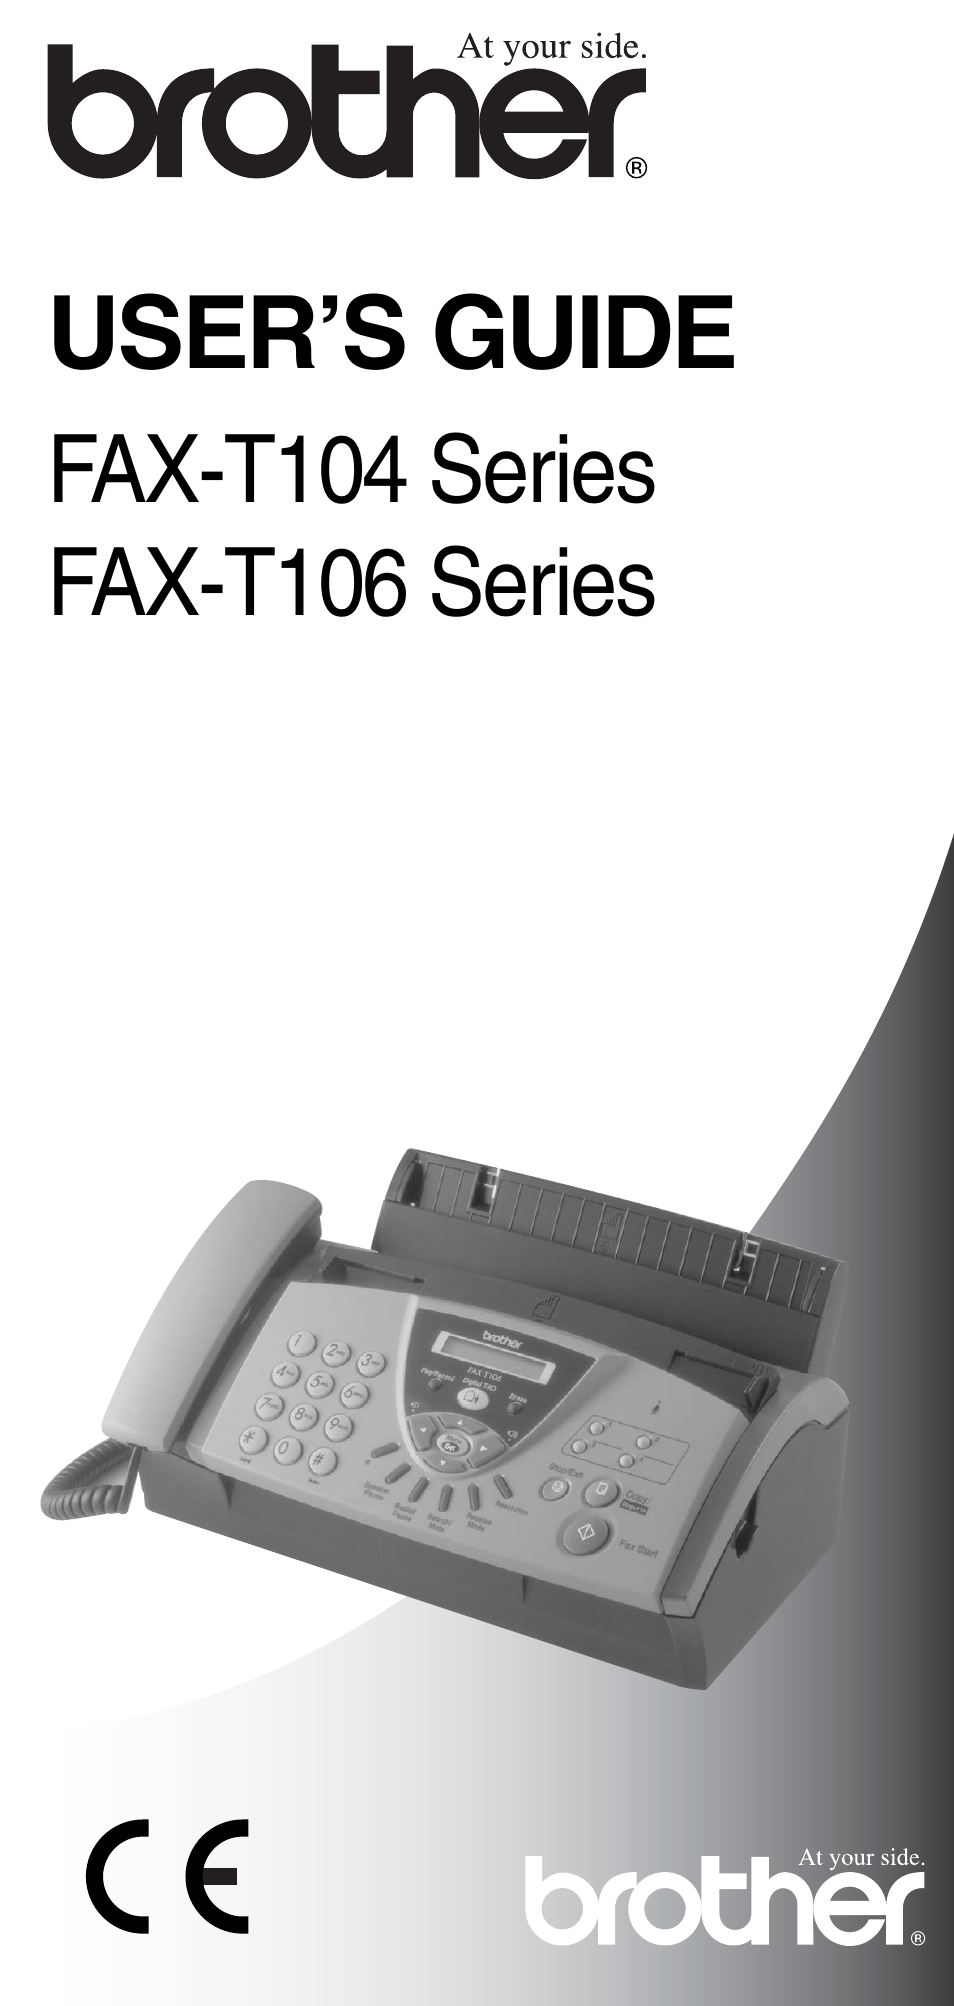 Brother FAX-T104 Series User Manual | 120 pages | Also for: FAX-T106 Series